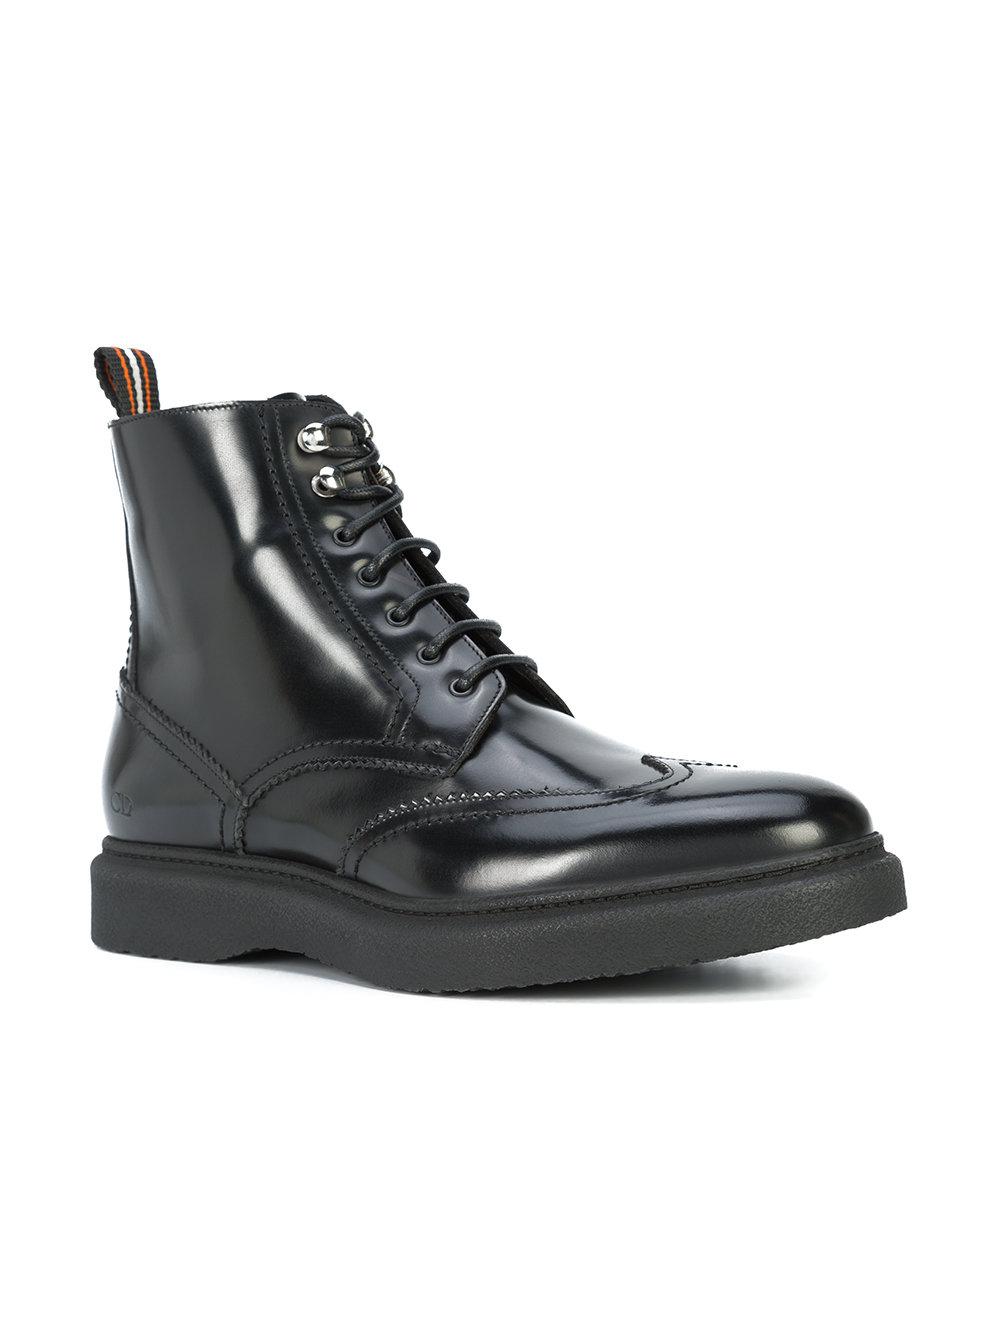 Dior Homme Lace Up Ankle Boots in Black | Lyst